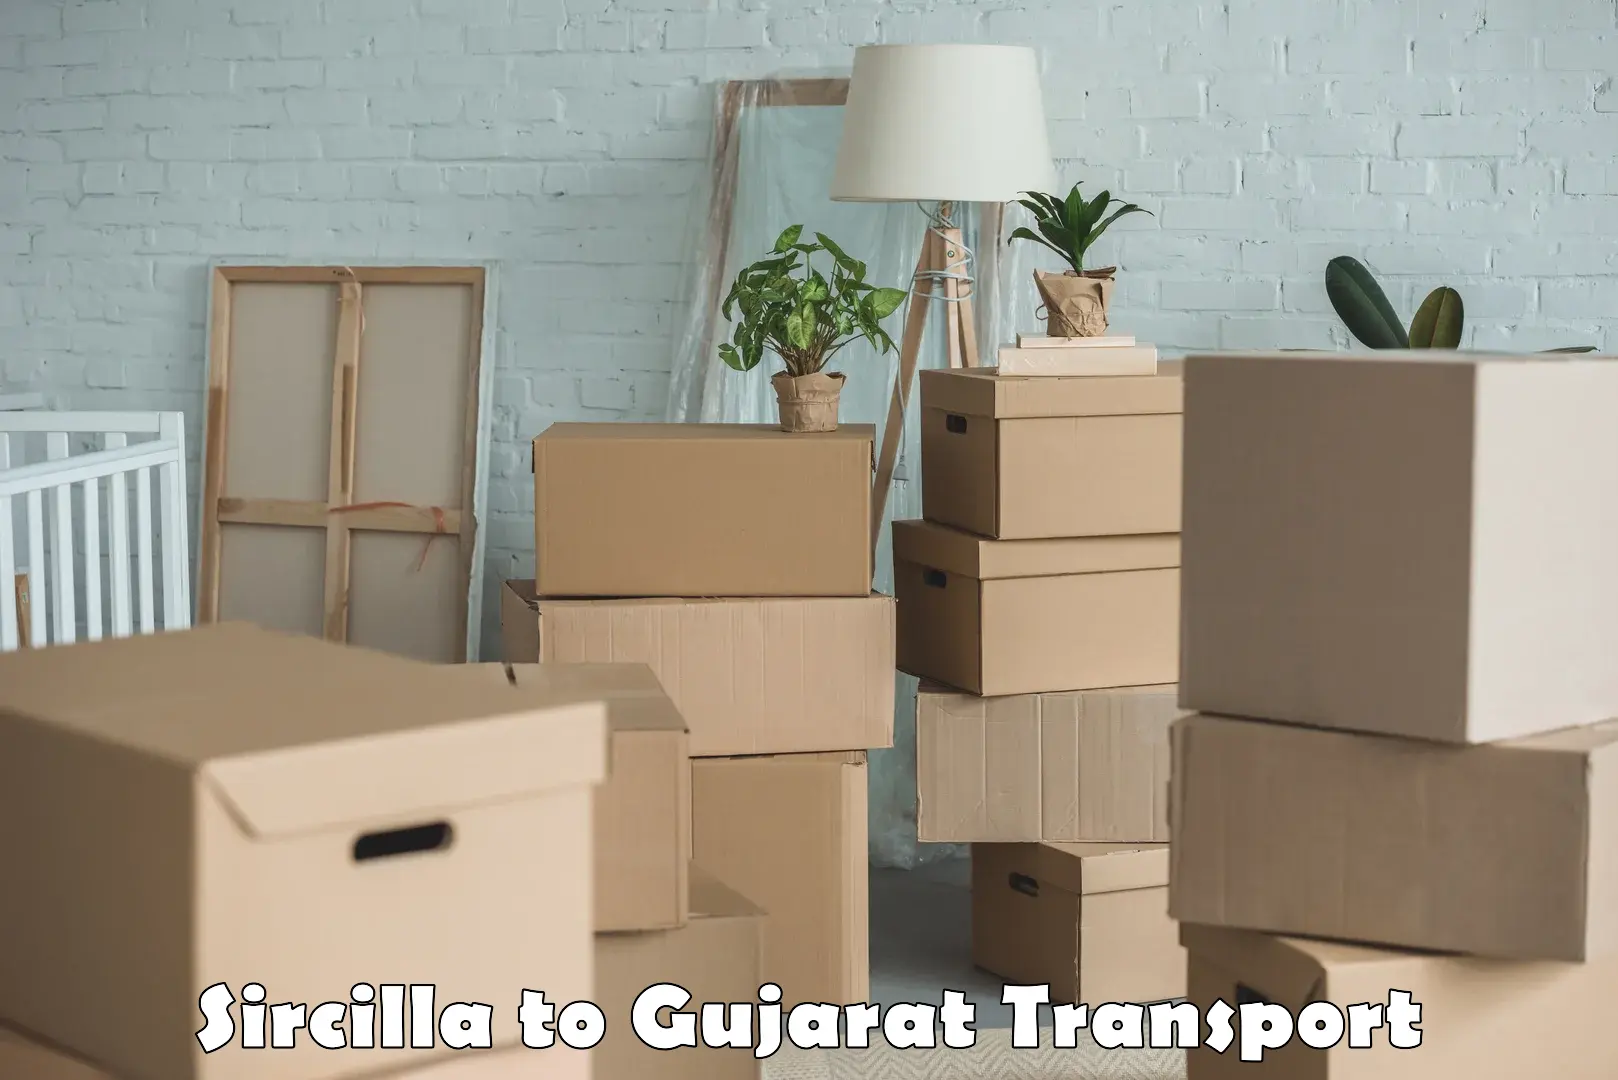 Transport bike from one state to another Sircilla to Porbandar